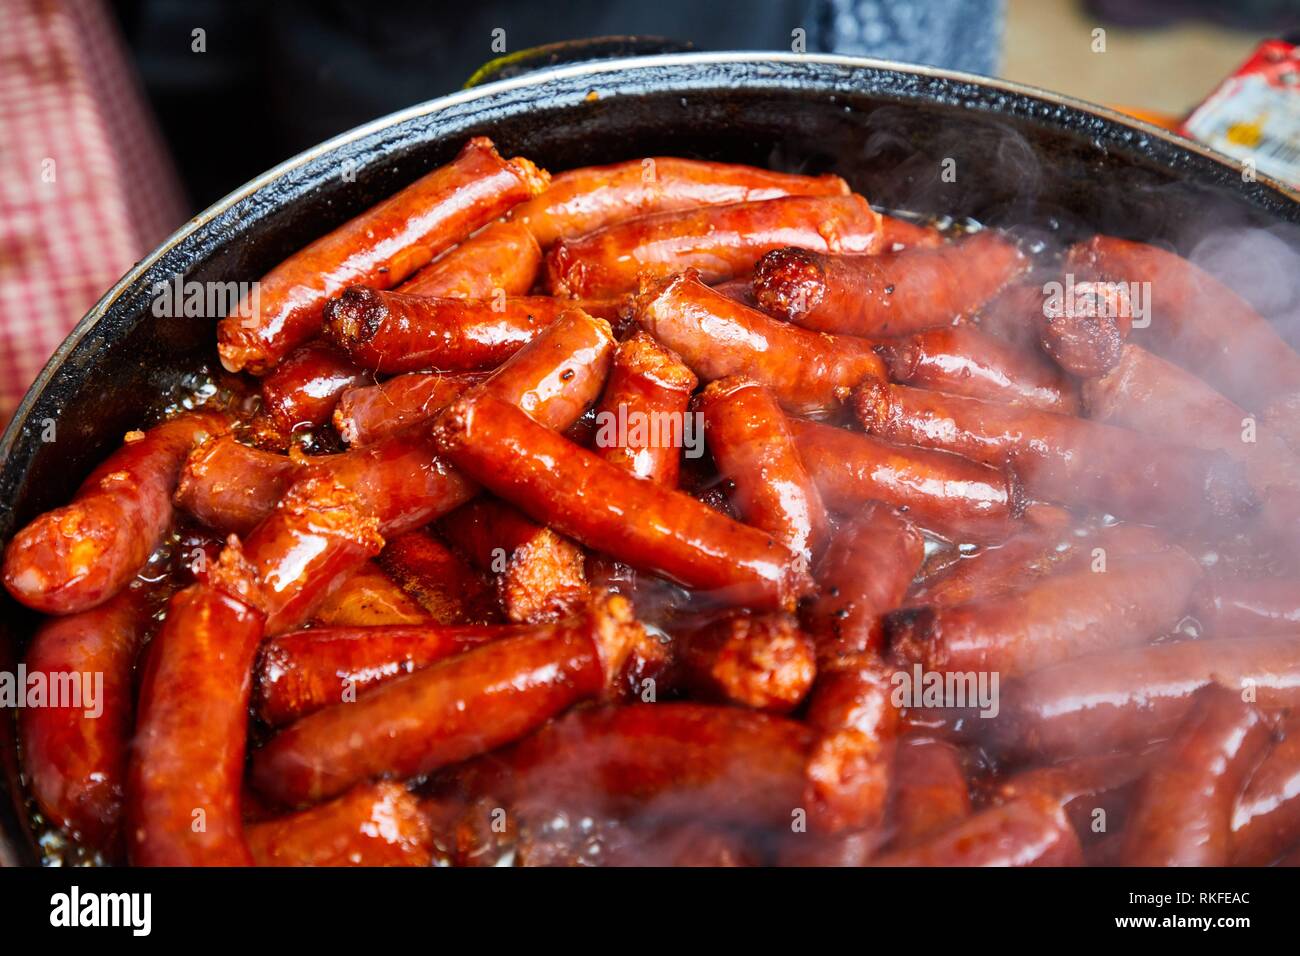 Txistorra, Fried sausage, Feria de Santo Tomás, The feast of St. Thomas takes place on December 21. During this day San Sebastián is transformed into Stock Photo